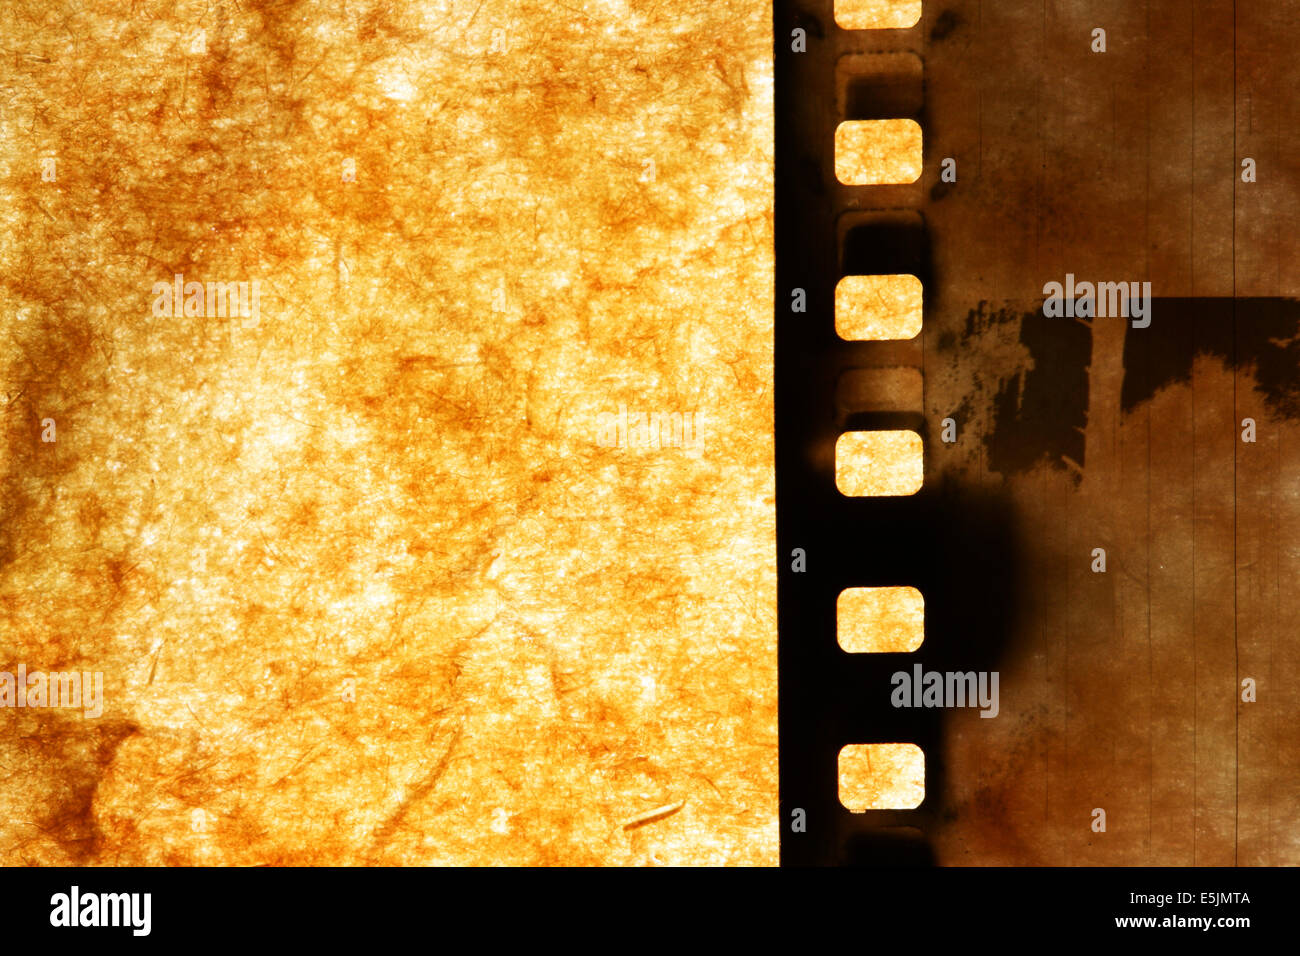 Old film strip over grunge paper background Stock Photo